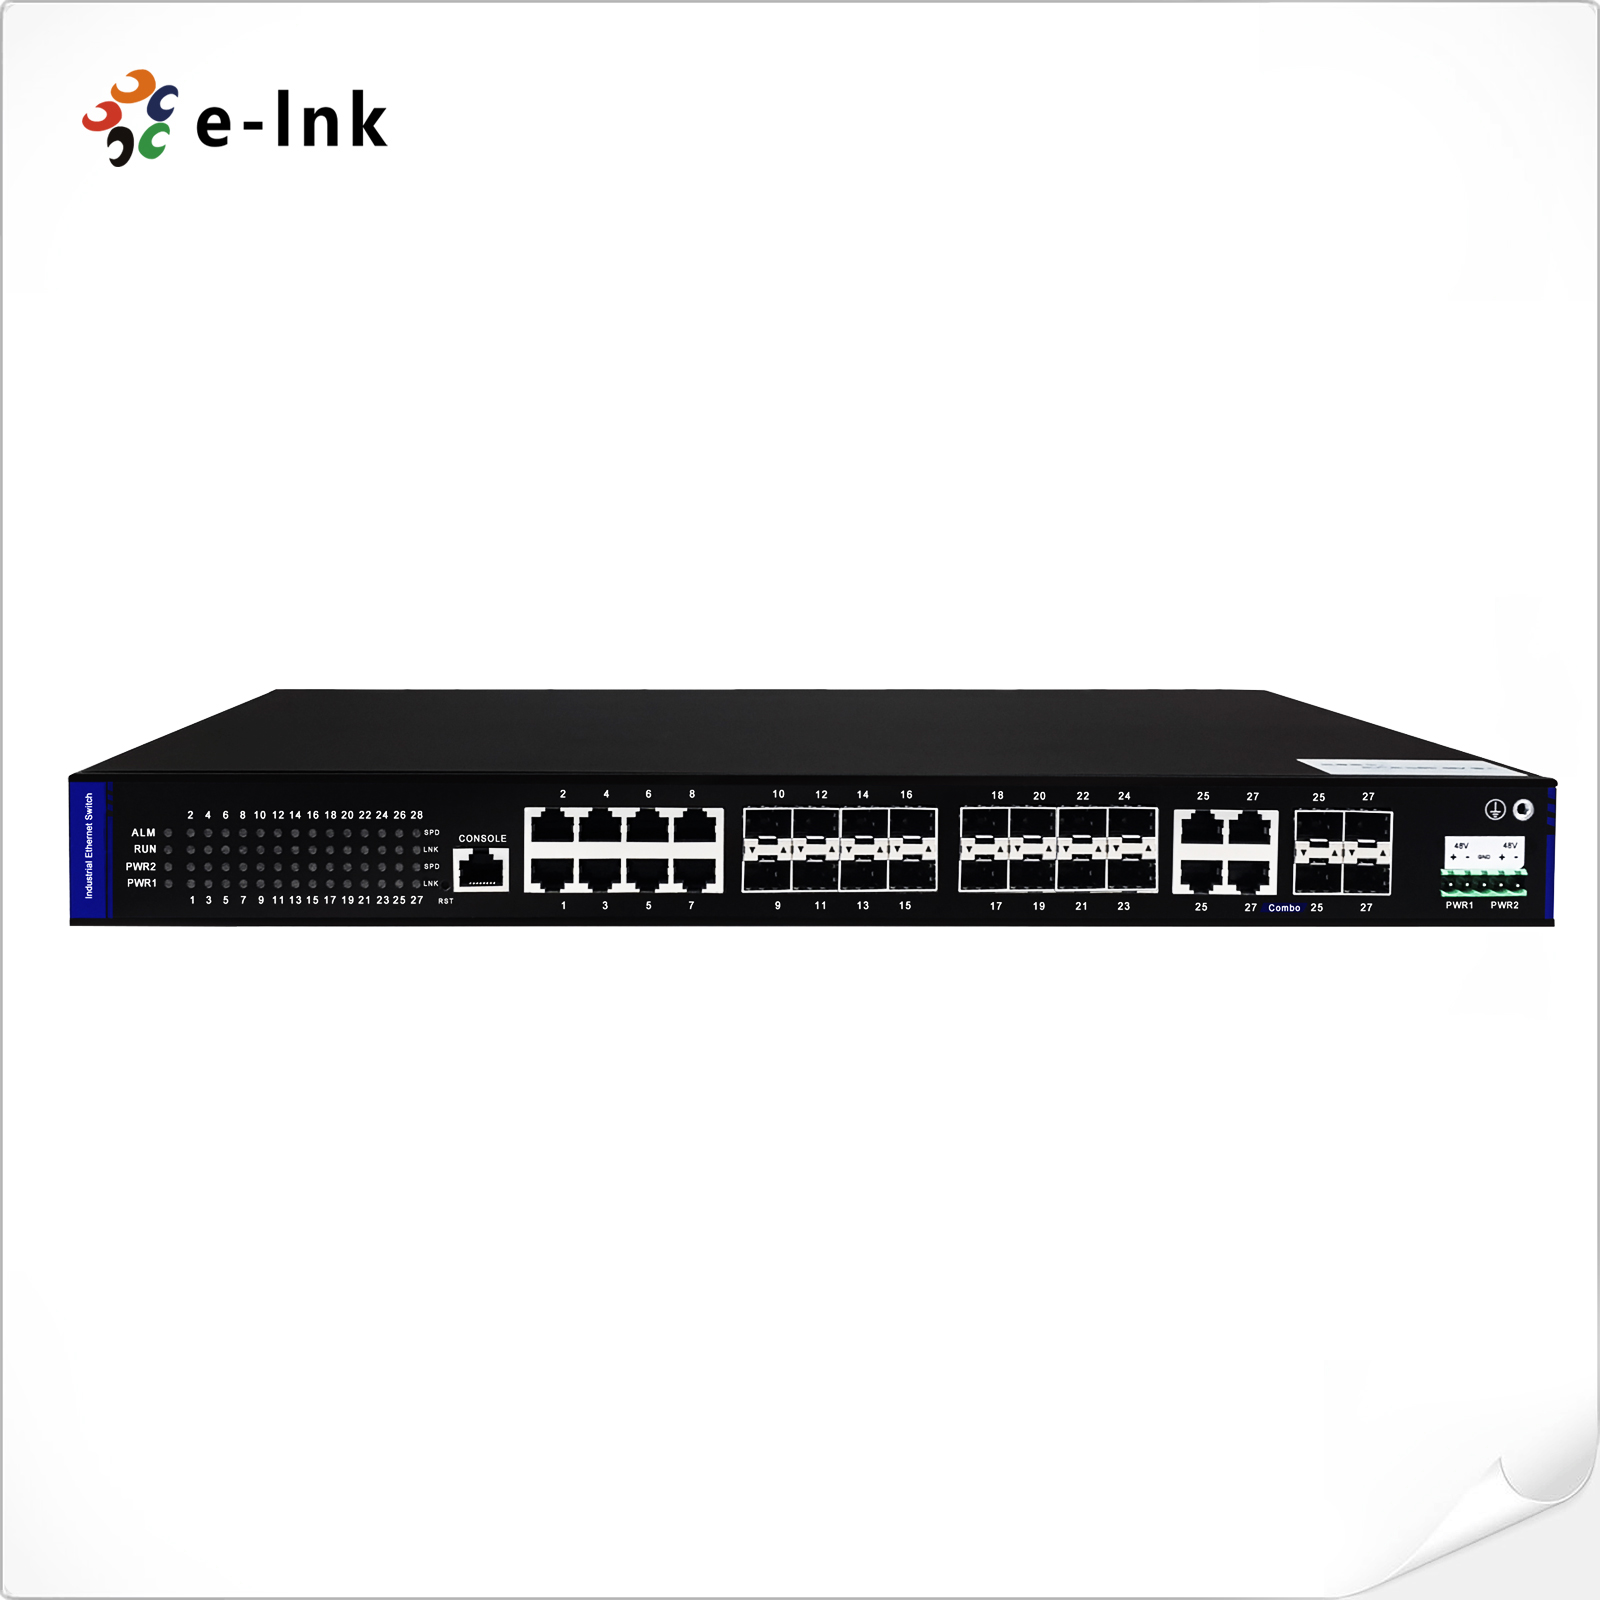 Managed Industrial 24-port 10/100/1000T 802.3at PoE + 4-port TP/SFP Combo Ethernet Switch